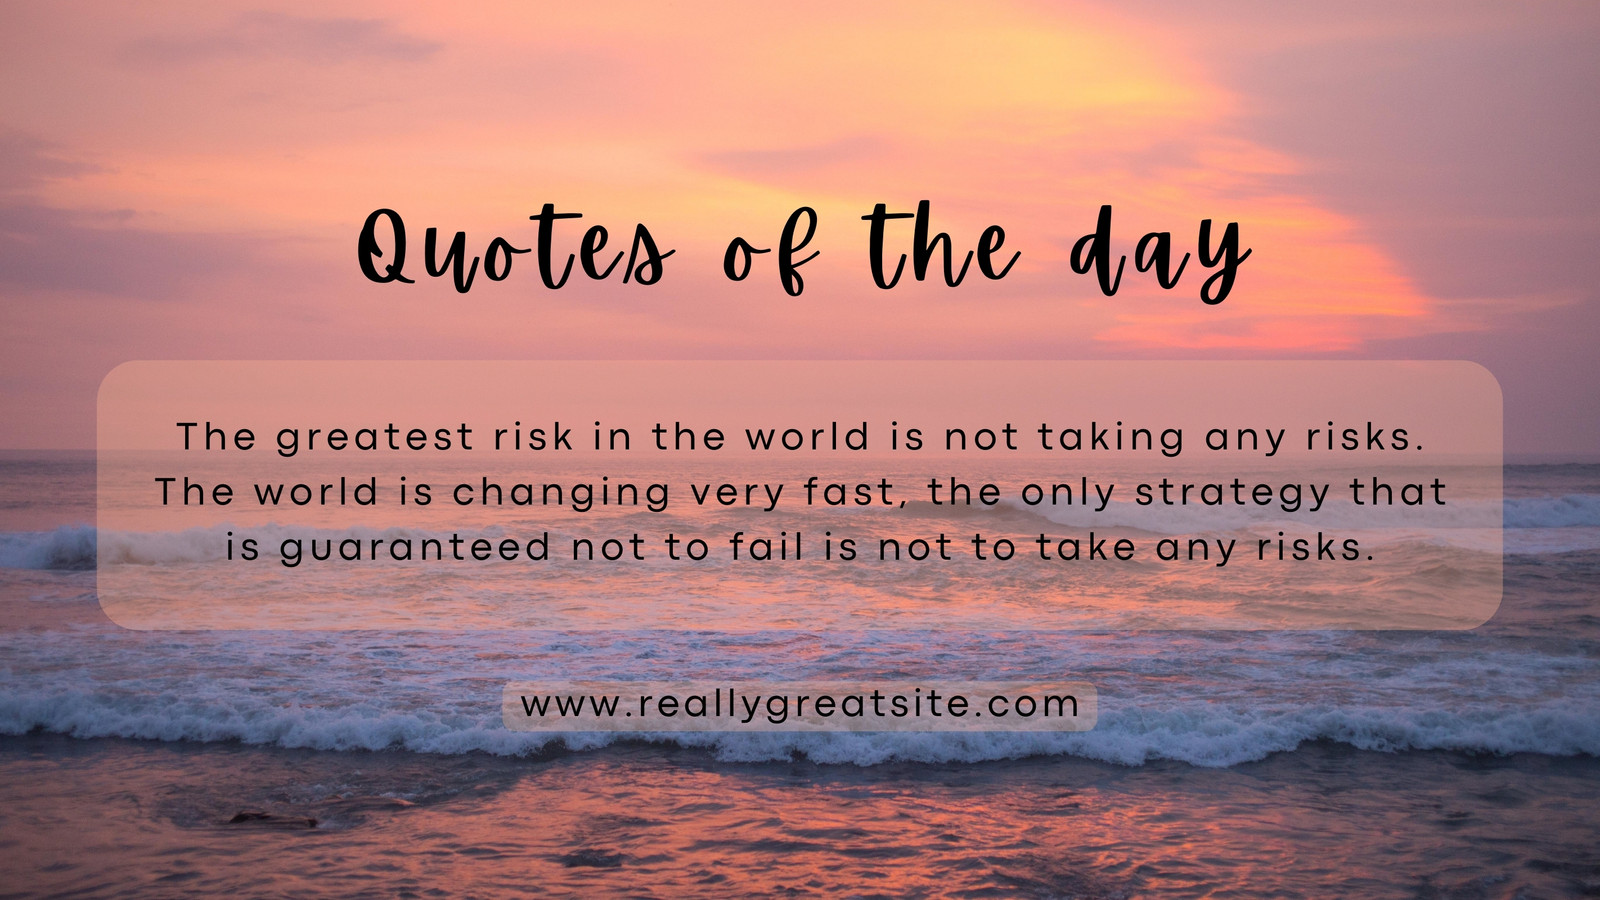 Orange Natural Quotes Of The Day Twitter Post 